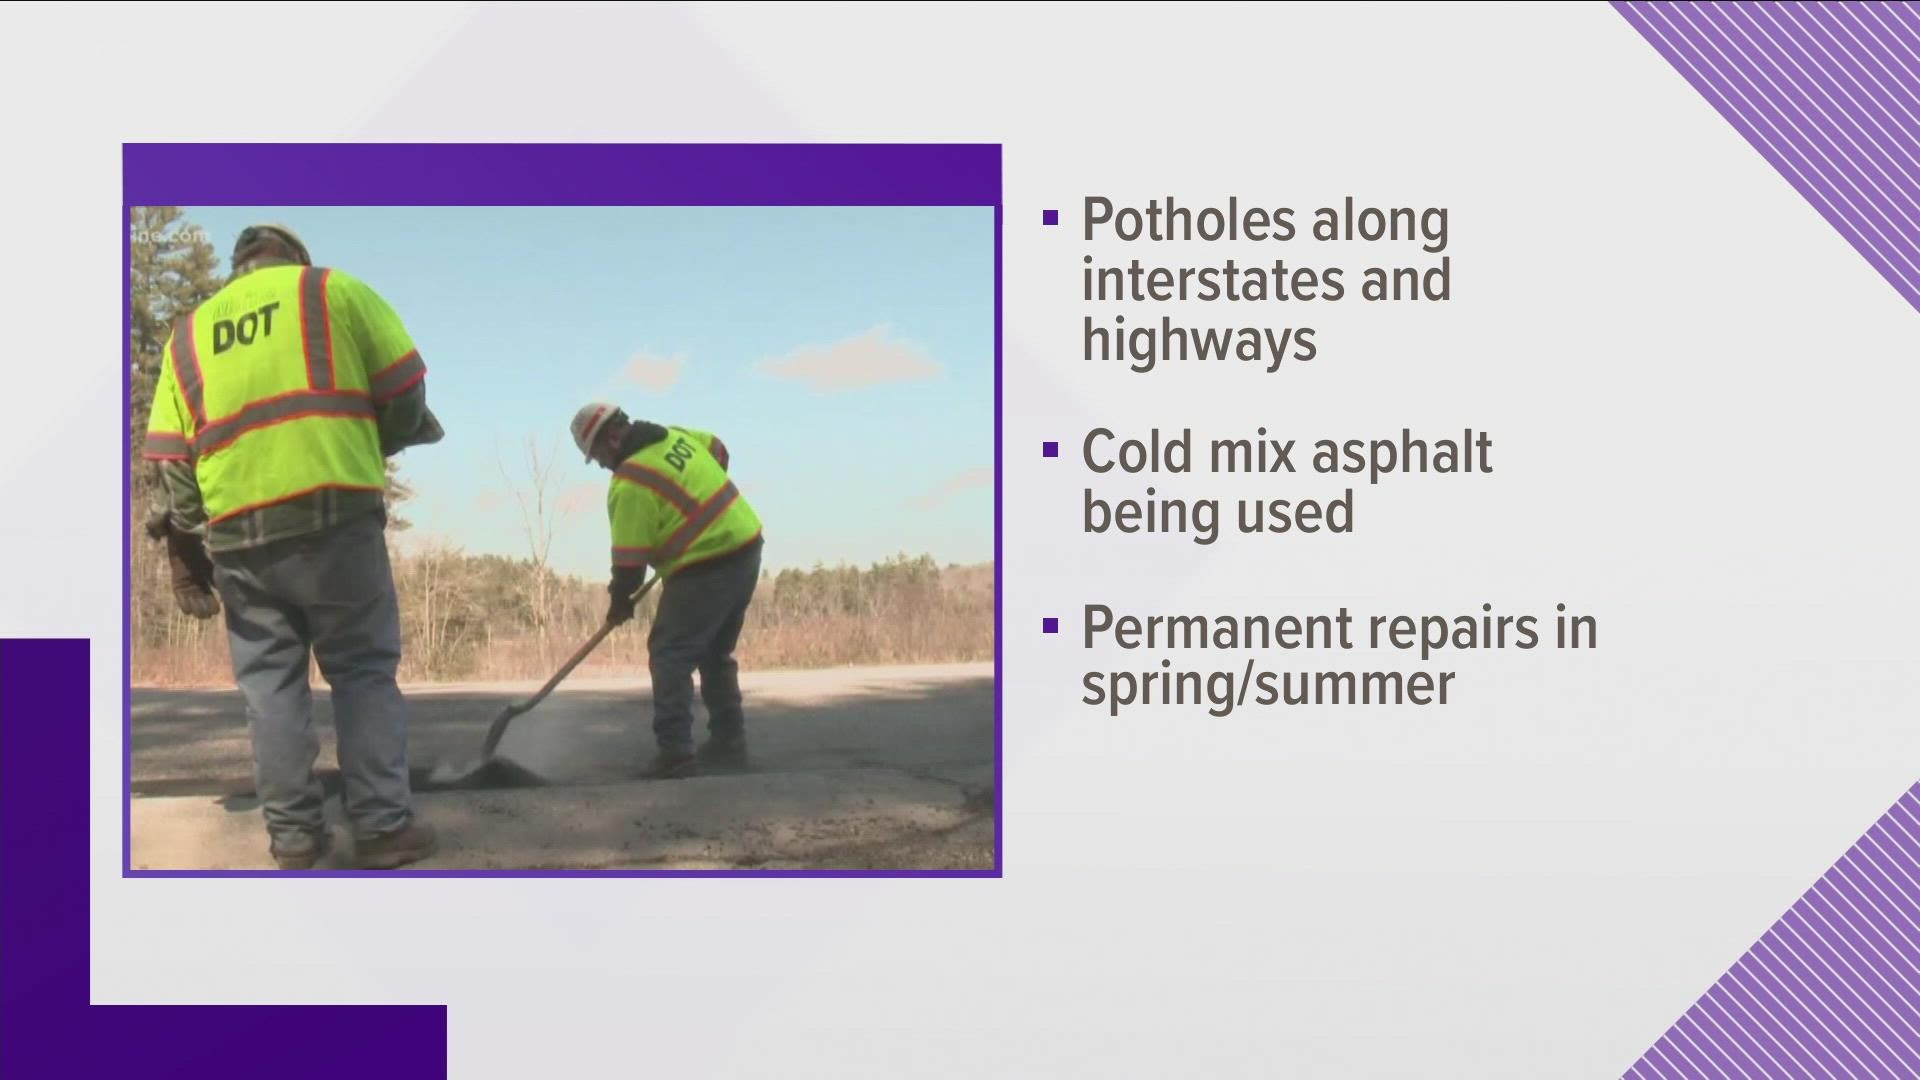 TDOT is launching a plan to repair the many potholes developing on interstates and highways.